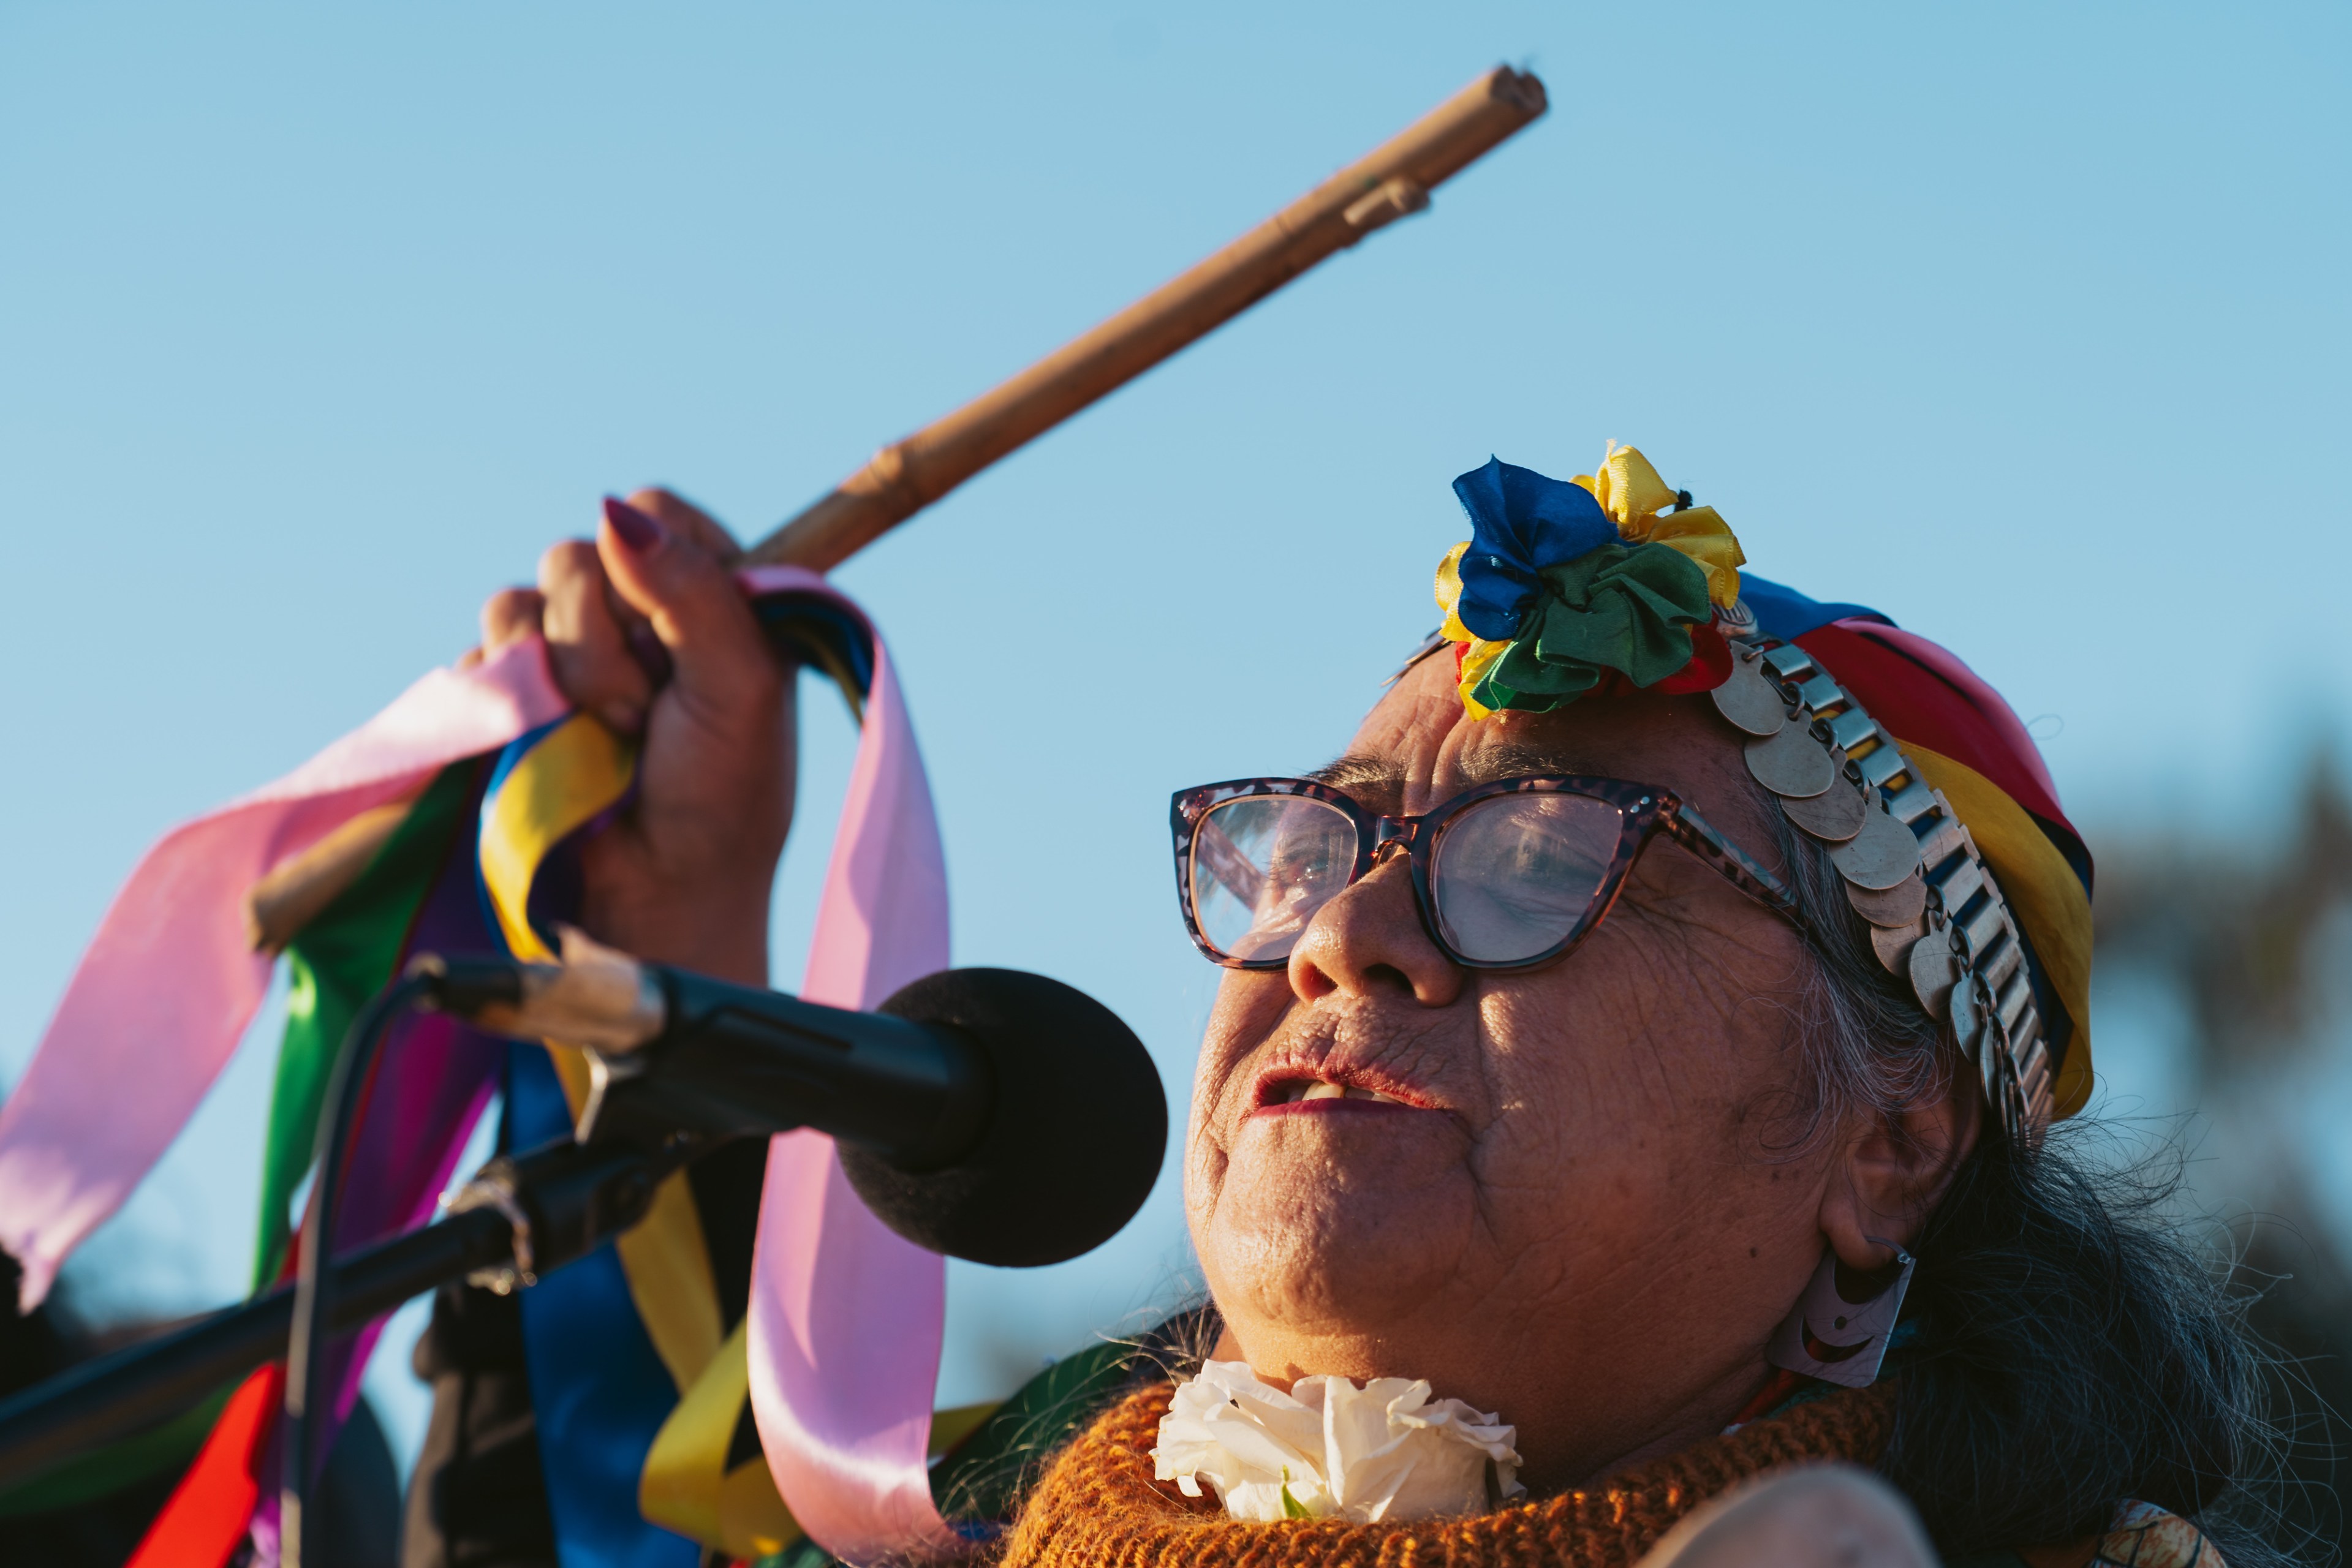 A close-up of a person wearing a colorful scarf headdress and holding a flute in one fist.